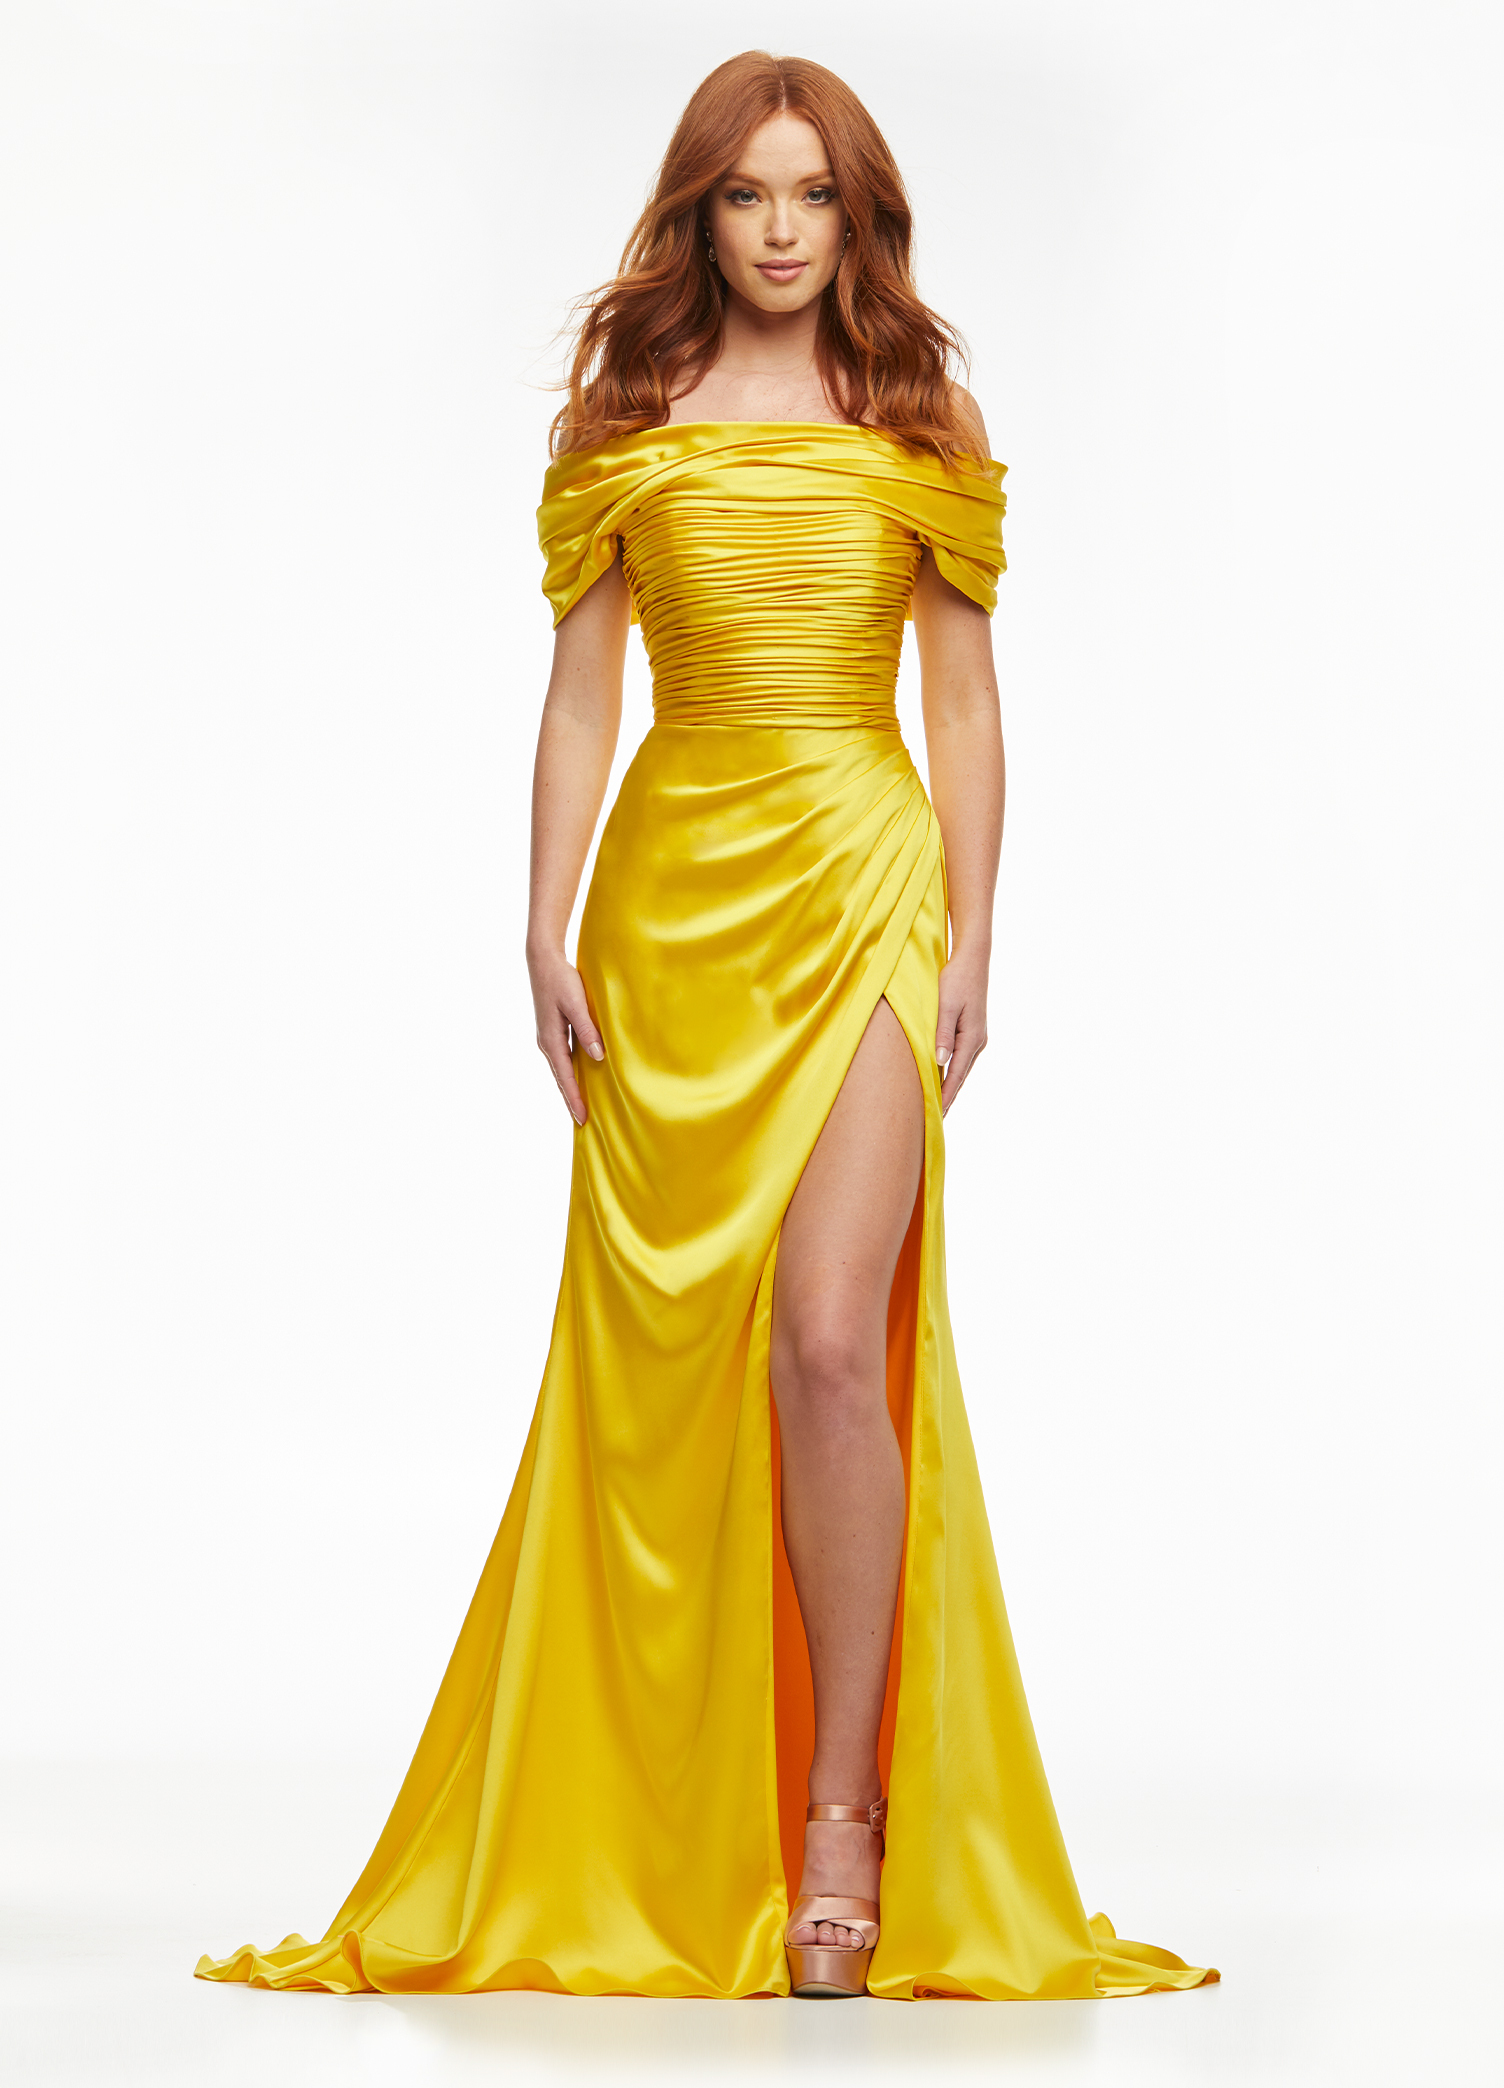 11093 Rouched Satin Off Shoulder Gown